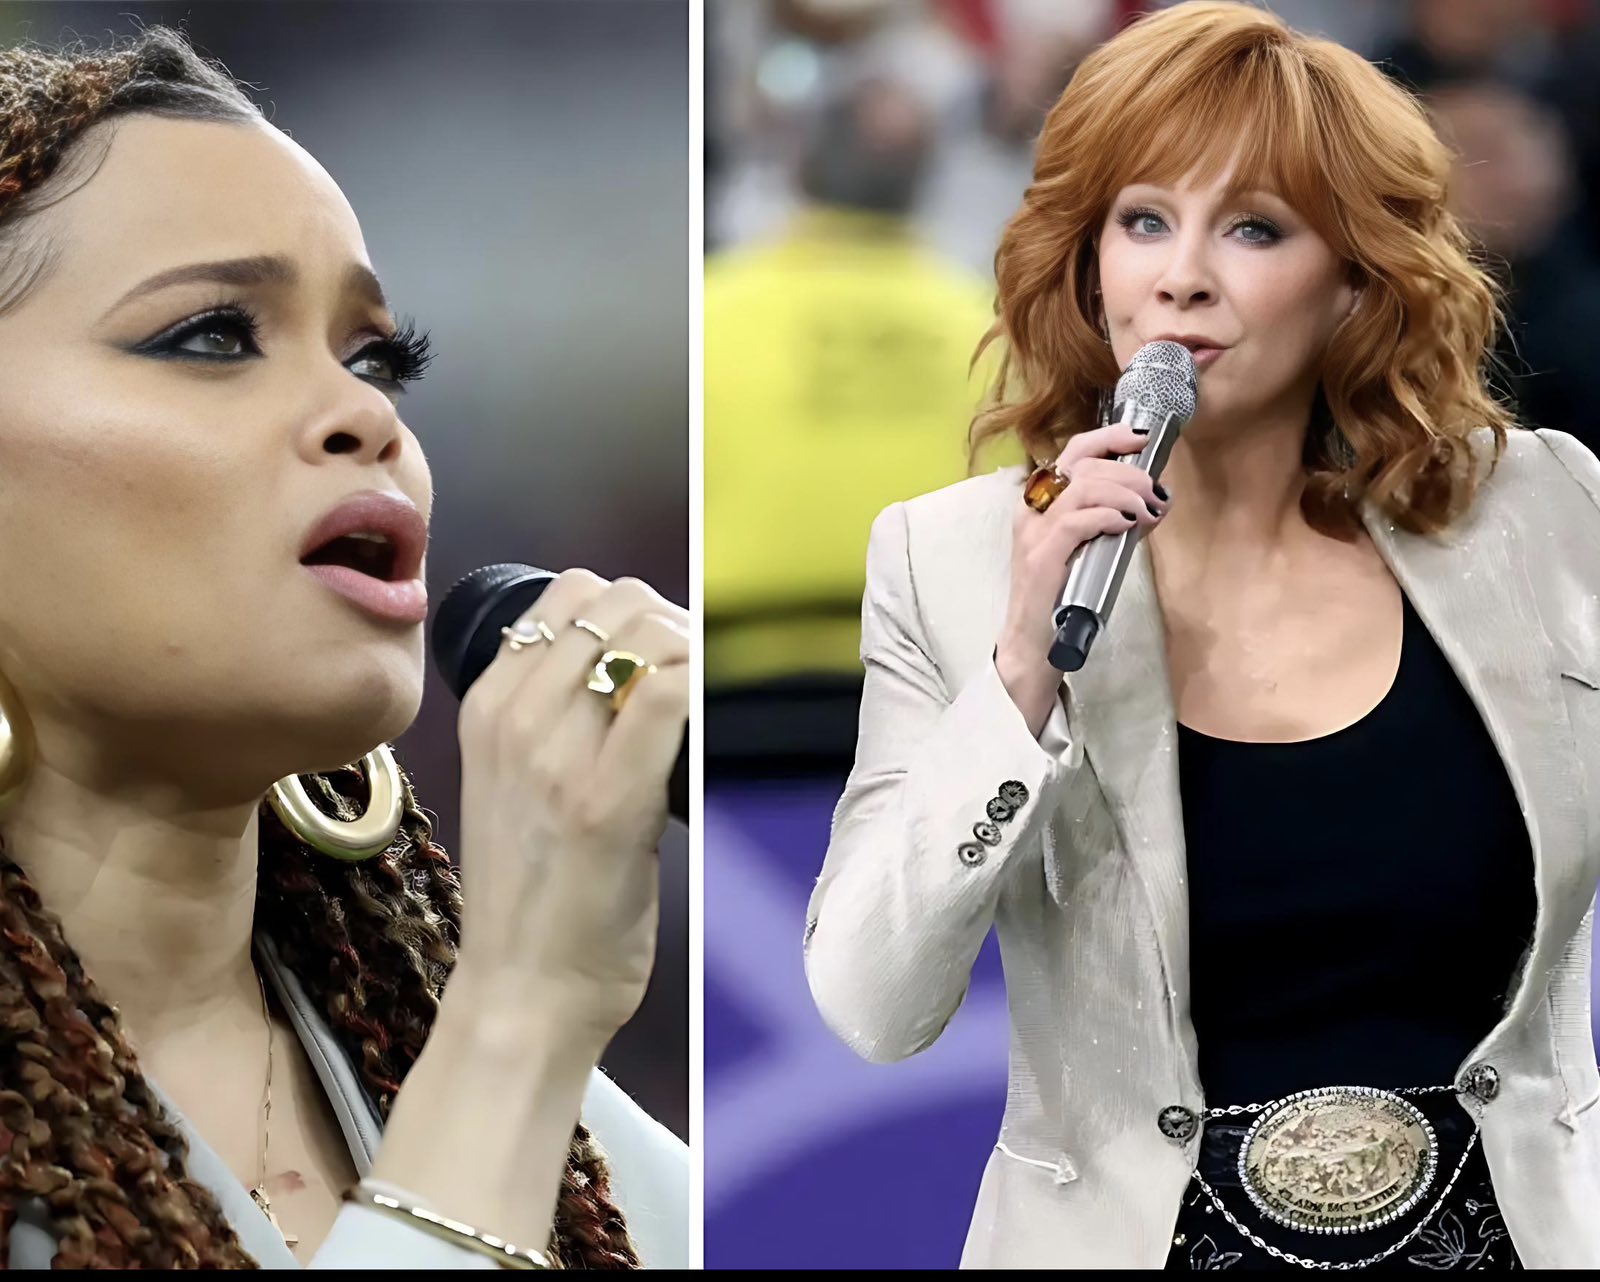 Fans cheered Reba McEntire’s rendition of the national anthem but booed Andra Day’s performance of the Black national anthem at Super Bowl LVIII.